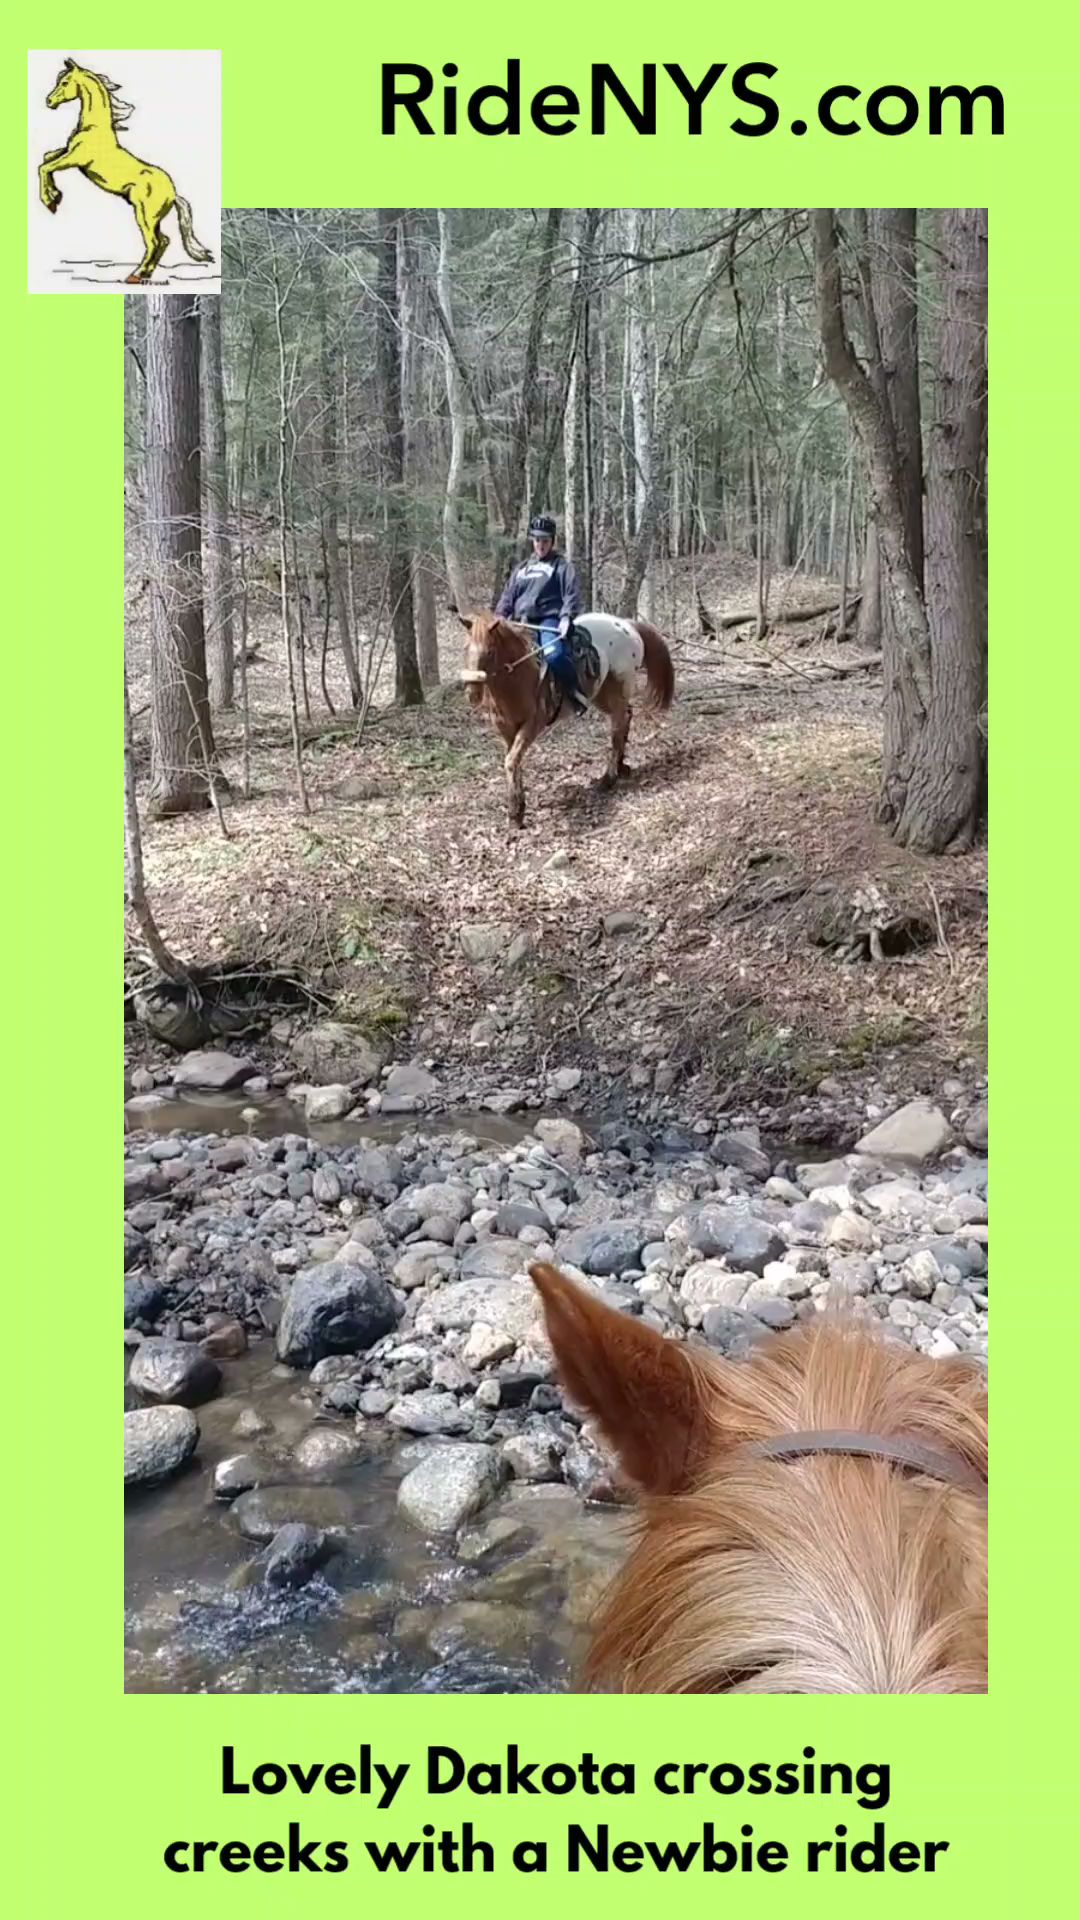 Adventure Horse Riding in NYS 8585 Buck Hill Rd, Westernville New York 13486